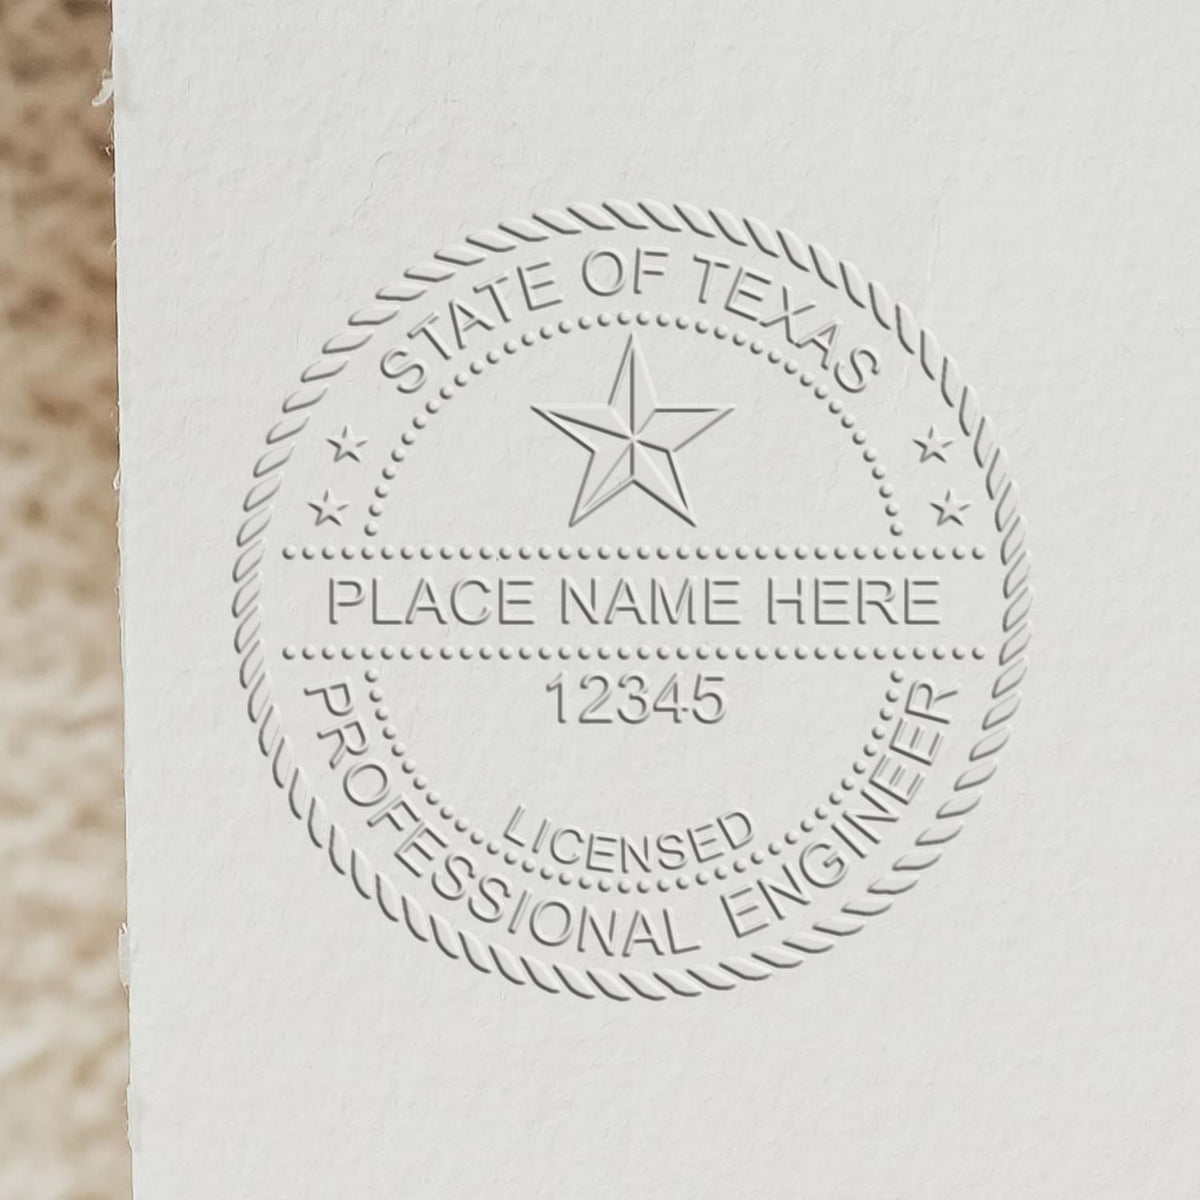 An in use photo of the Hybrid Texas Engineer Seal showing a sample imprint on a cardstock